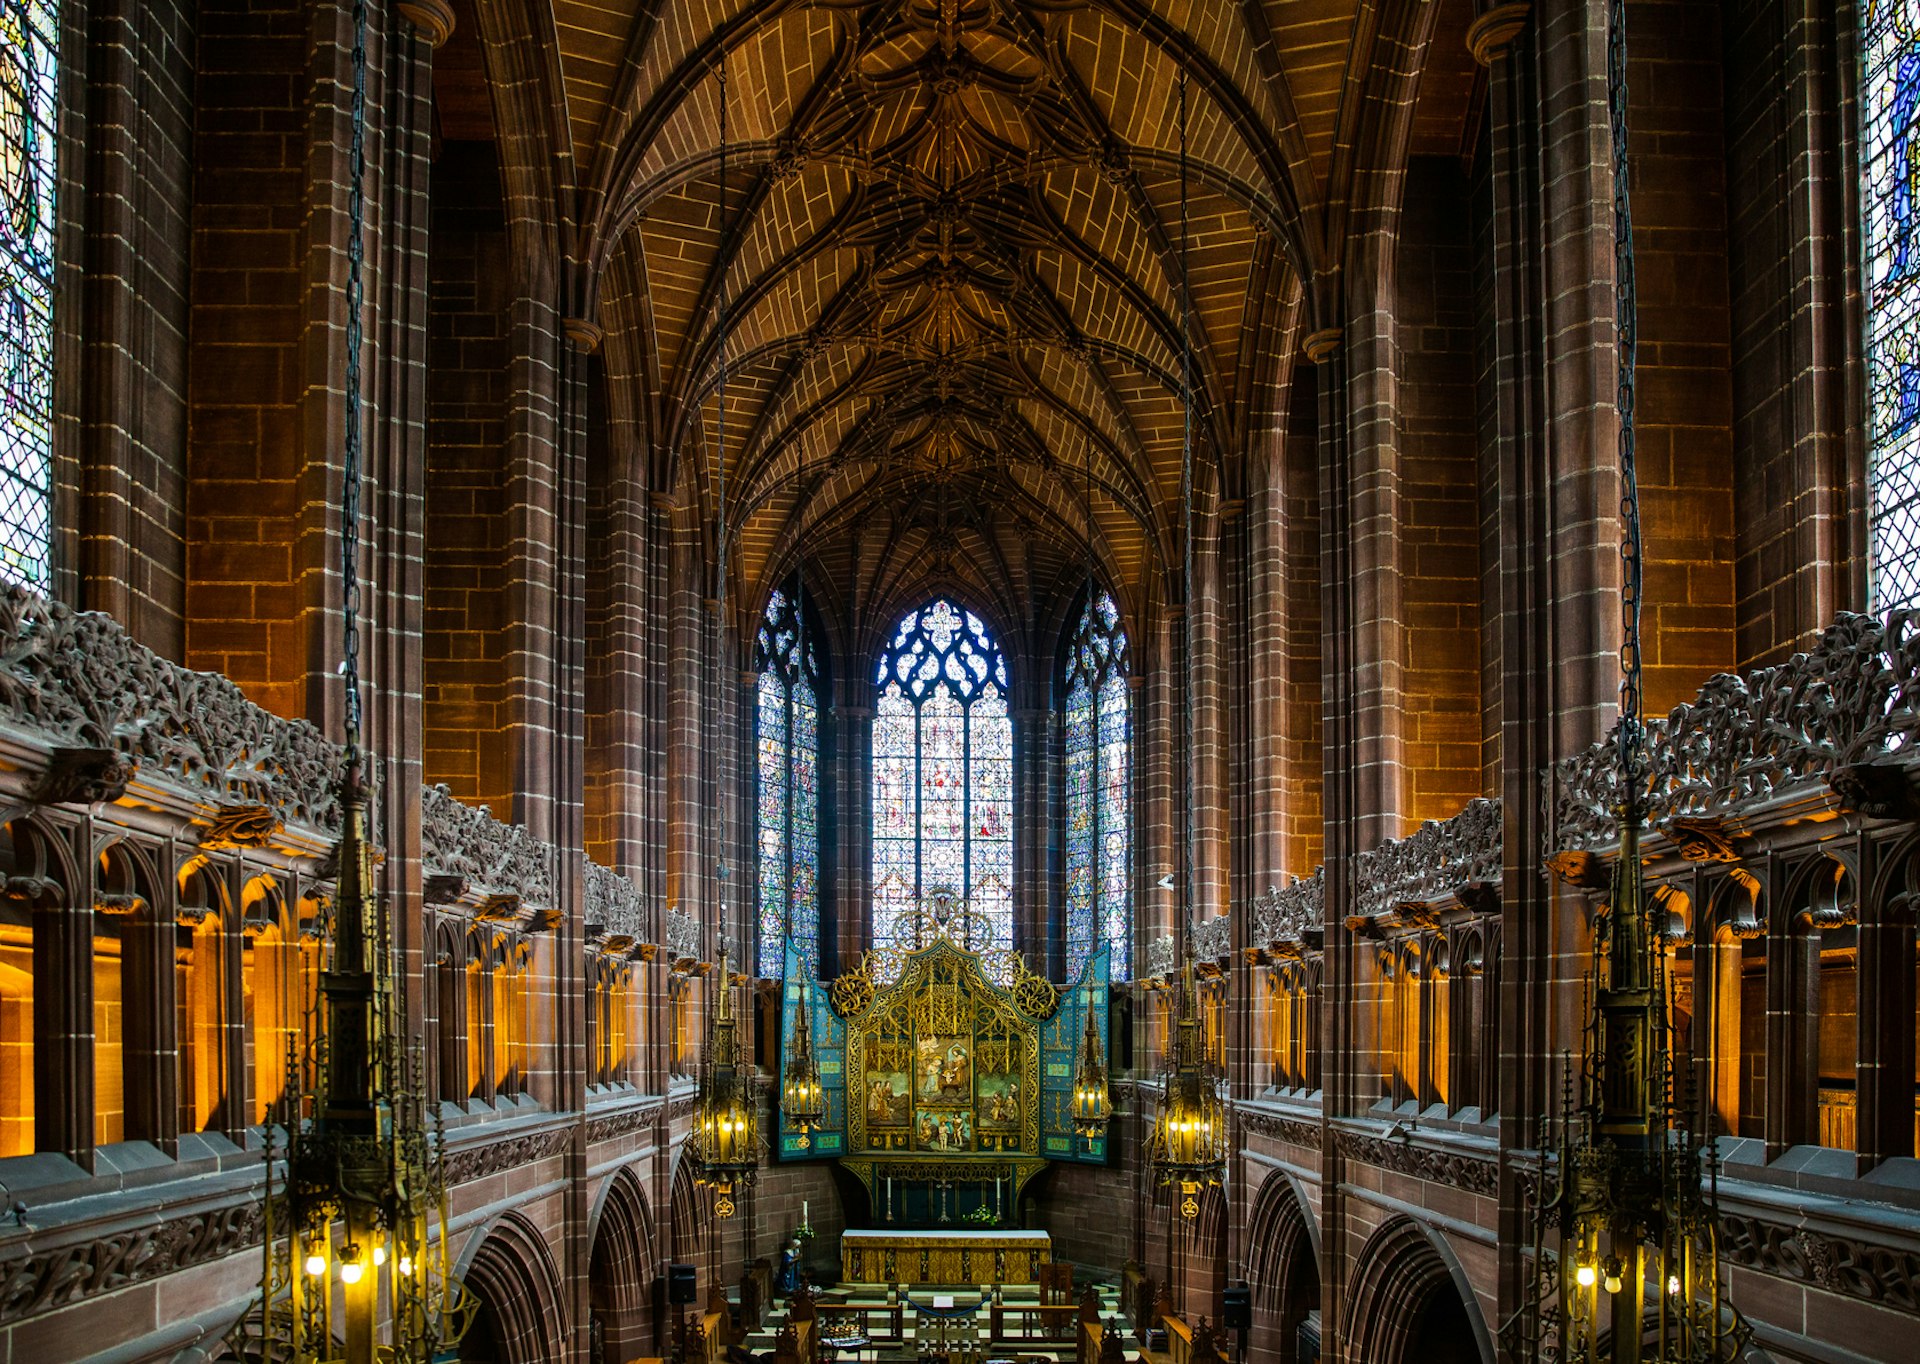 The Lady Chapel in Liverpool Cathedral